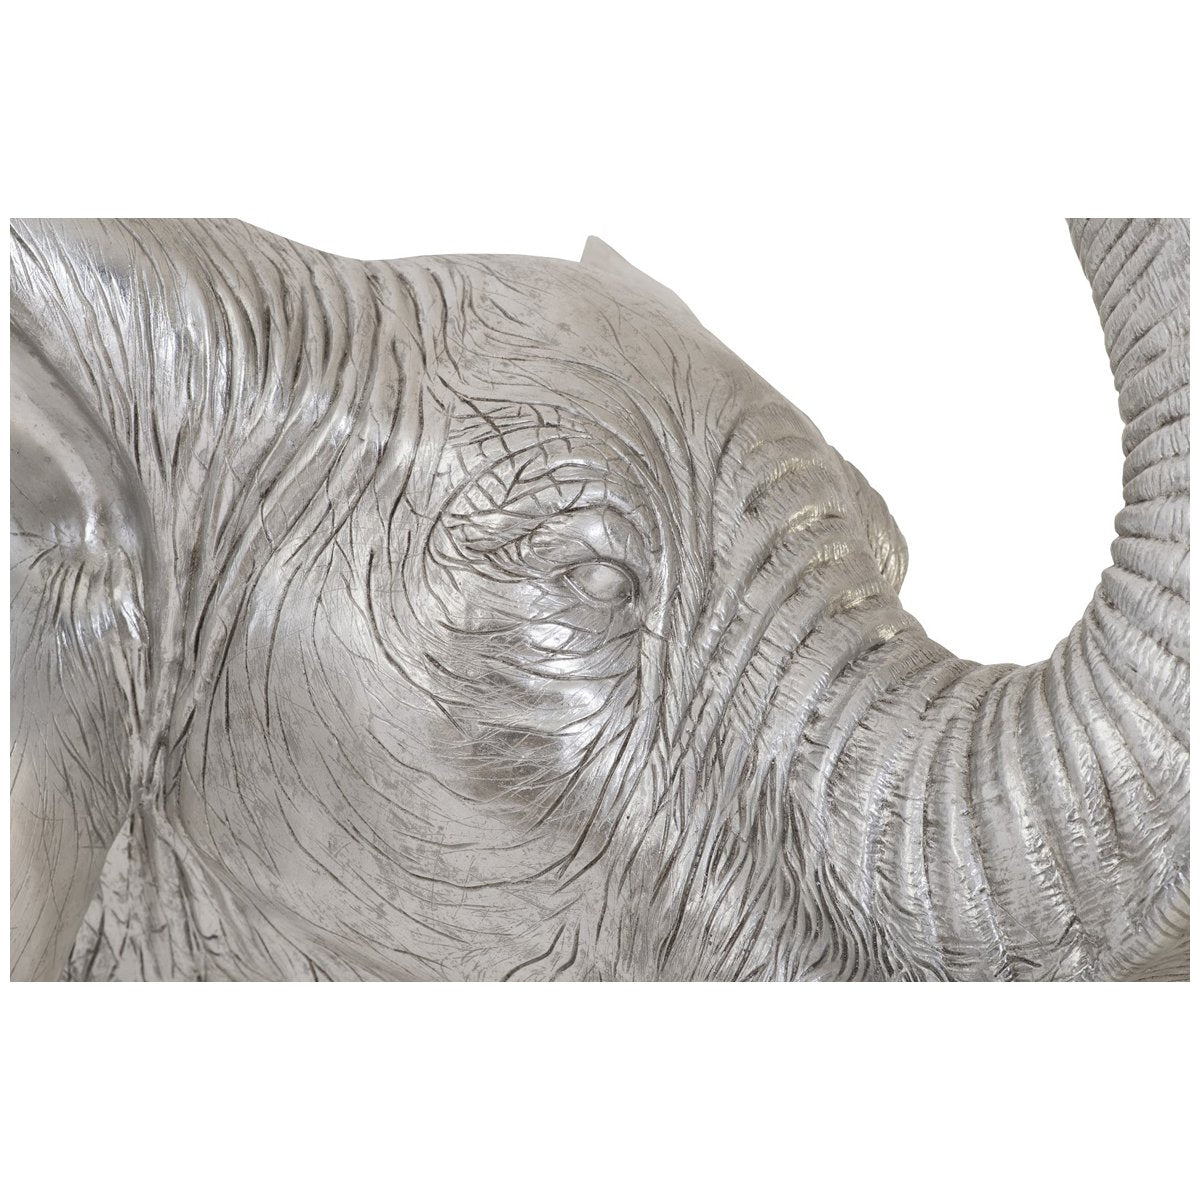 Phillips Collection Elephant Wall Art